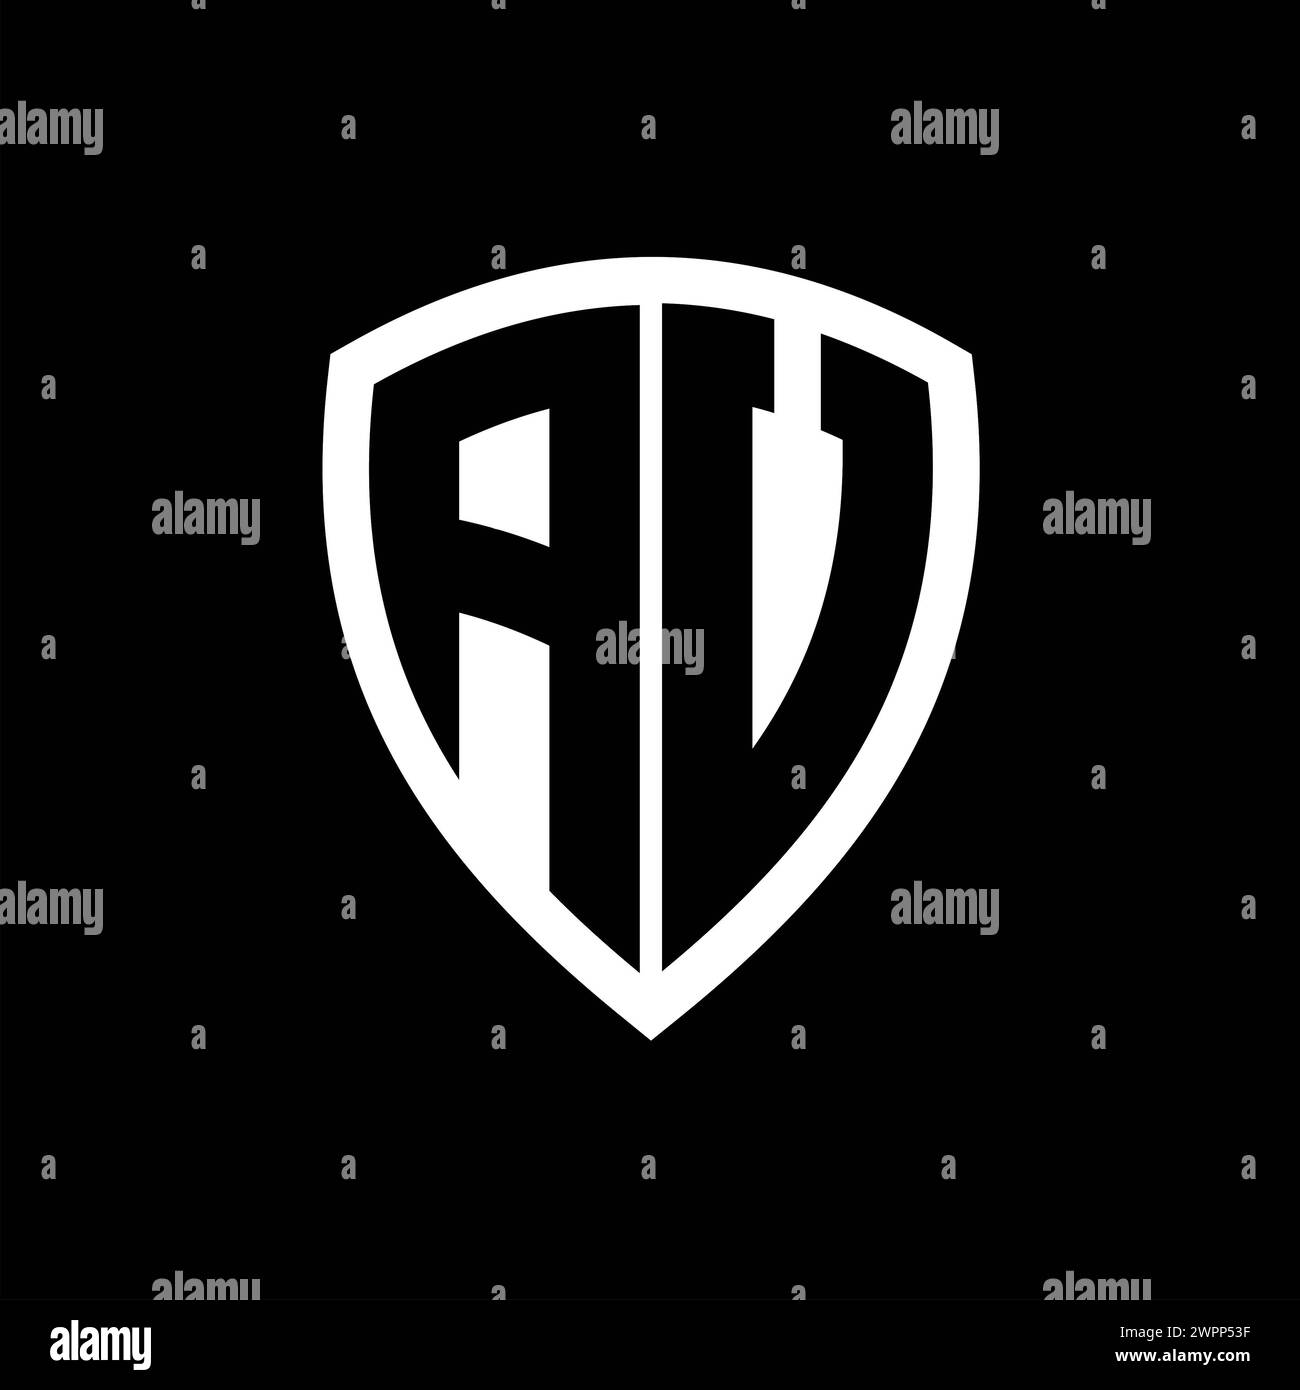 AV monogram logo with bold letters shield shape with black and white color design template Stock Photo